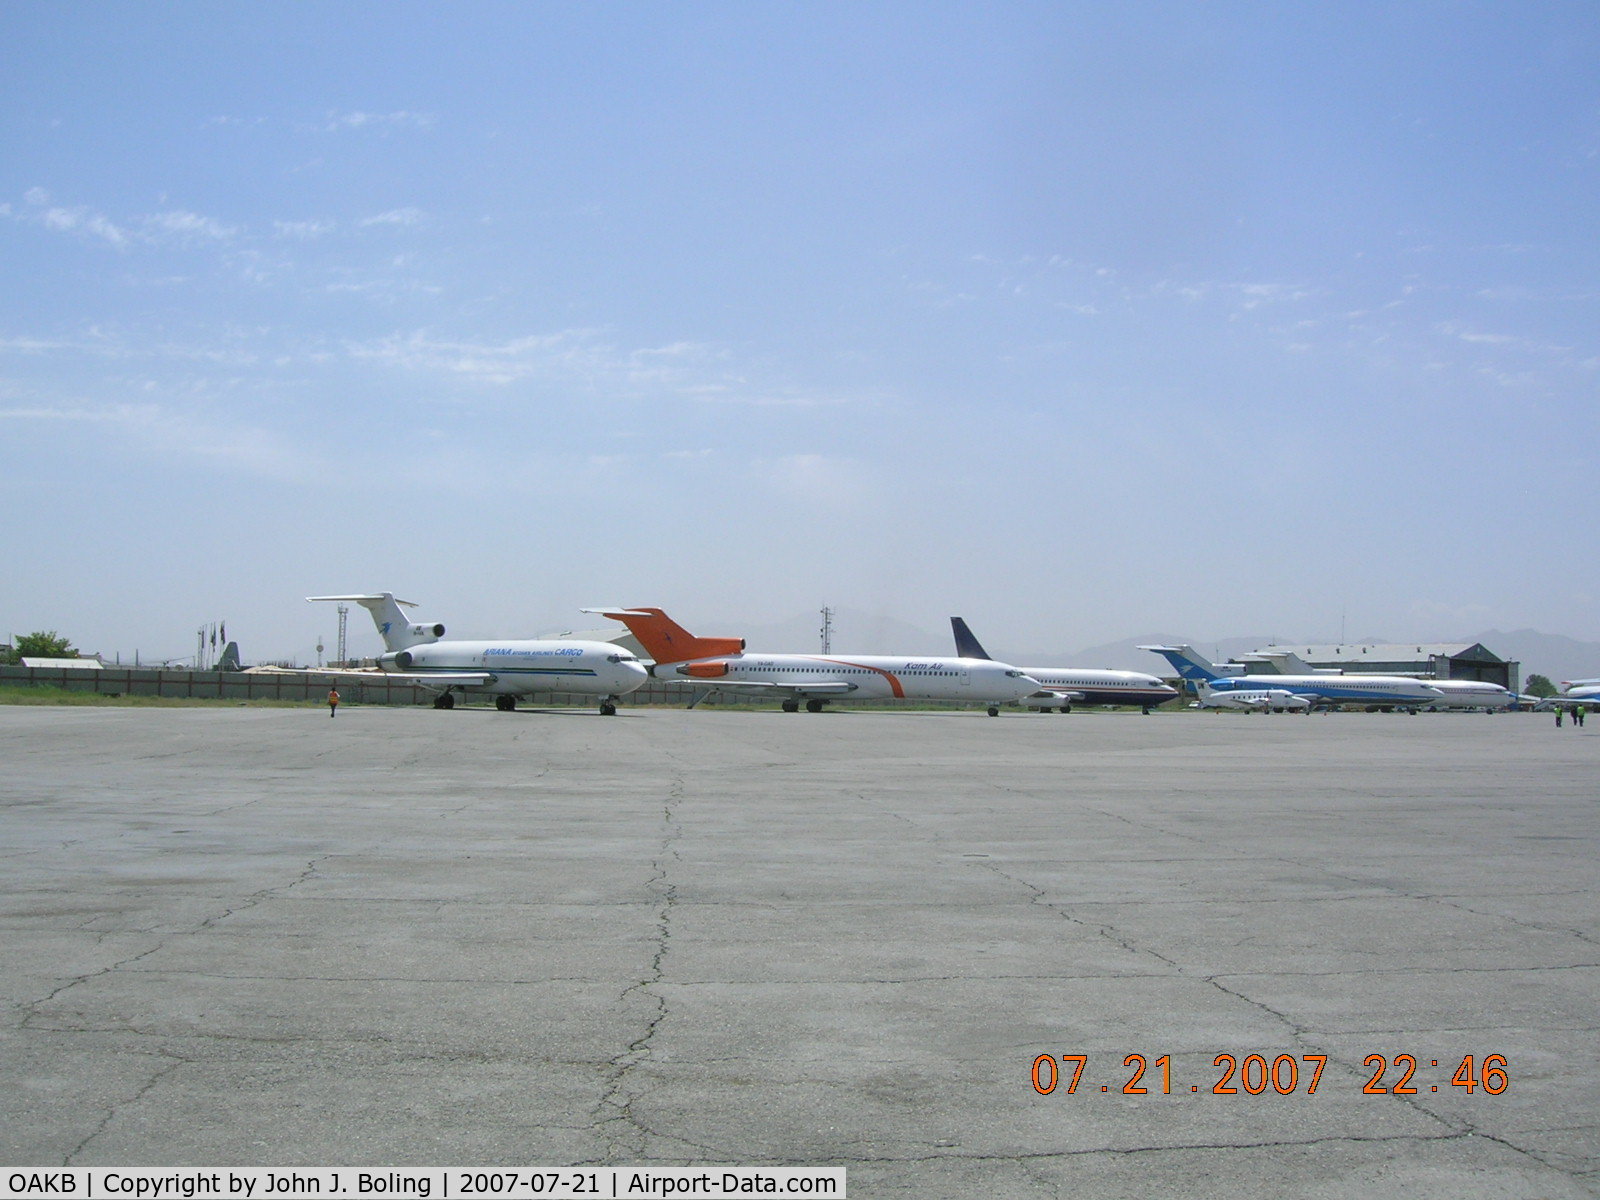 Kabul International Airport, Kabul Afghanistan (OAKB) - Old 727s and 737-200s don't die - they move to Kabul